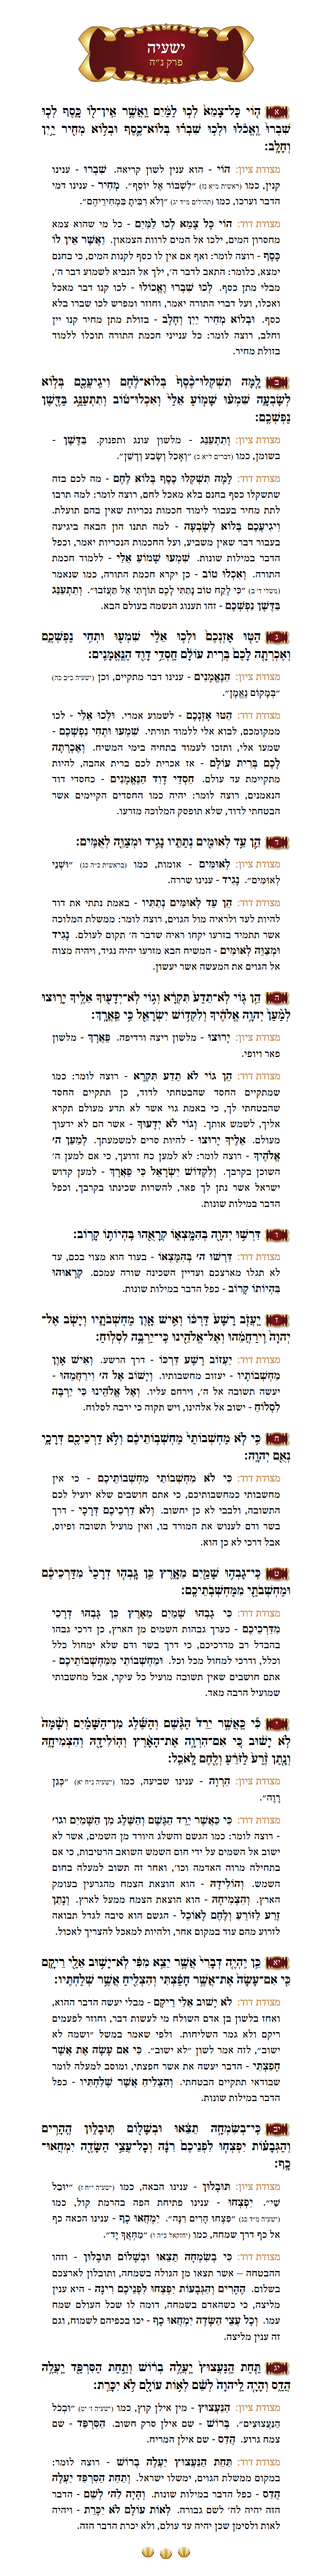 Sefer Yeshayohu Chapter 55 with commentary